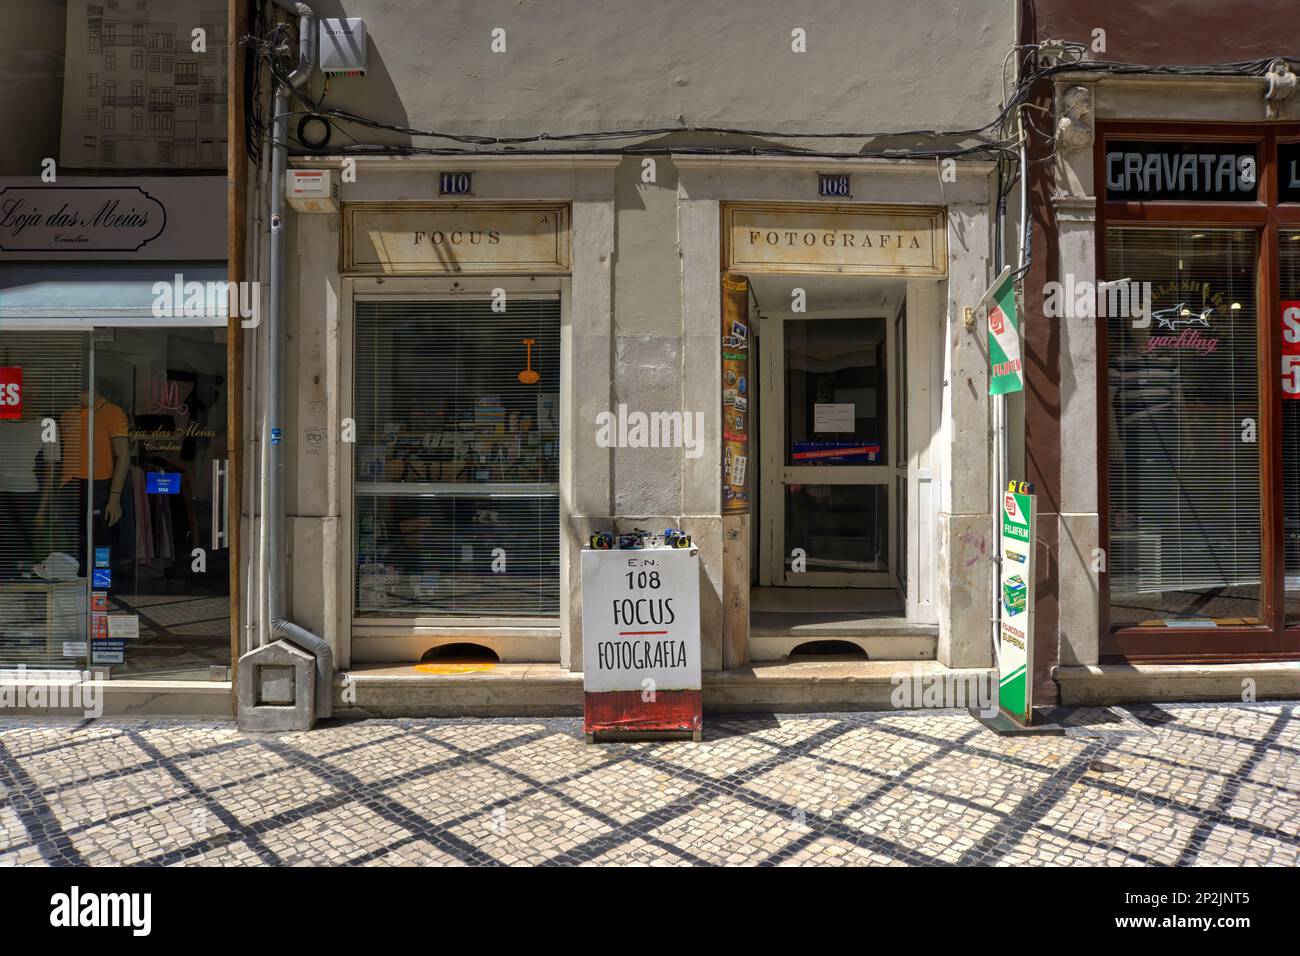 Coimbra, Portugal - August 15, 2022: Frontage of old photographic shop with tiled pavement in foreground Stock Photo